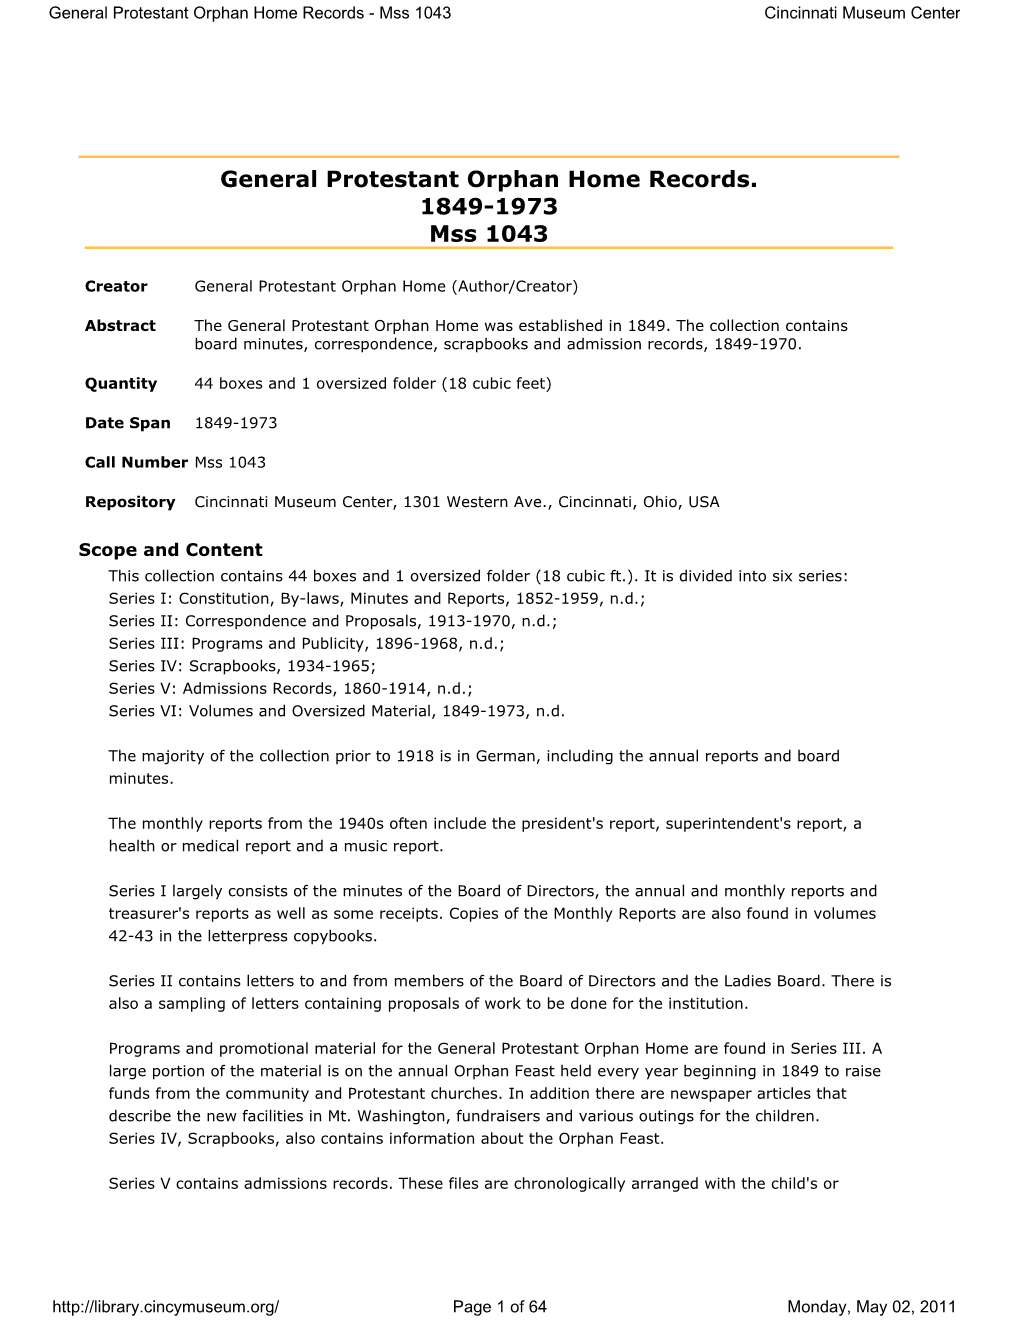 General Protestant Orphan Home Records. 1849-1973 Mss 1043